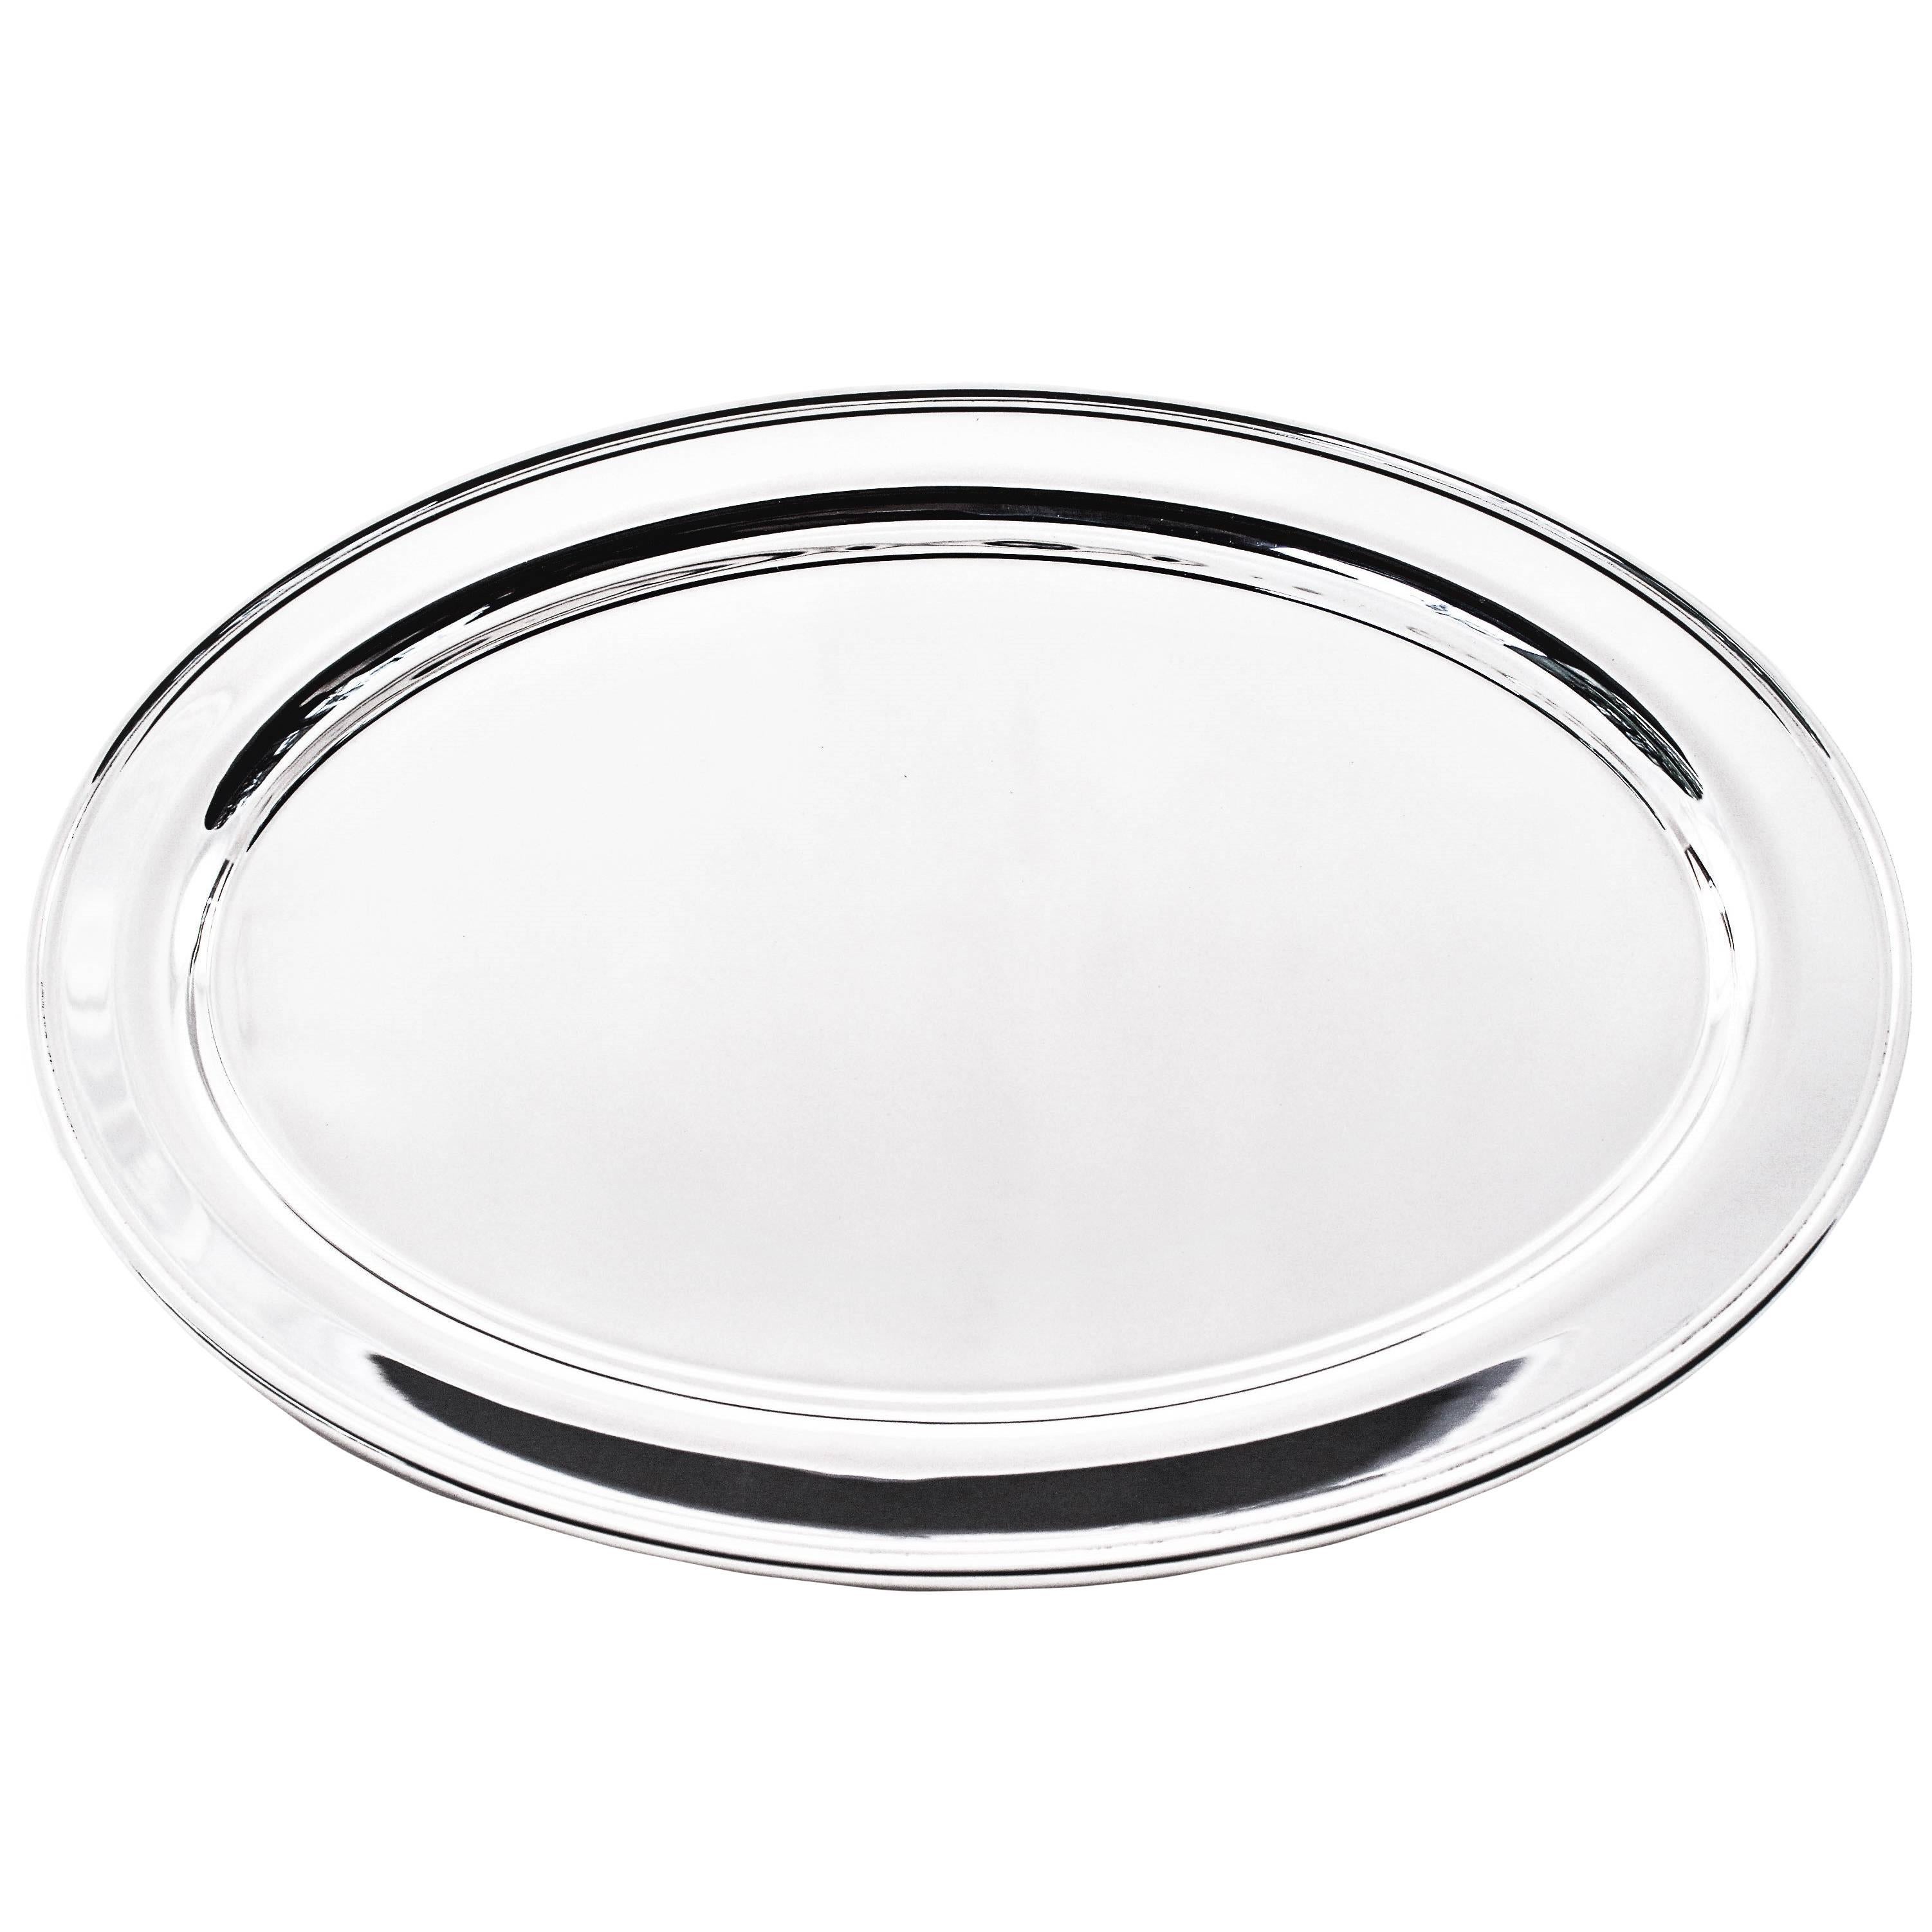 Oval Tray by Manchester